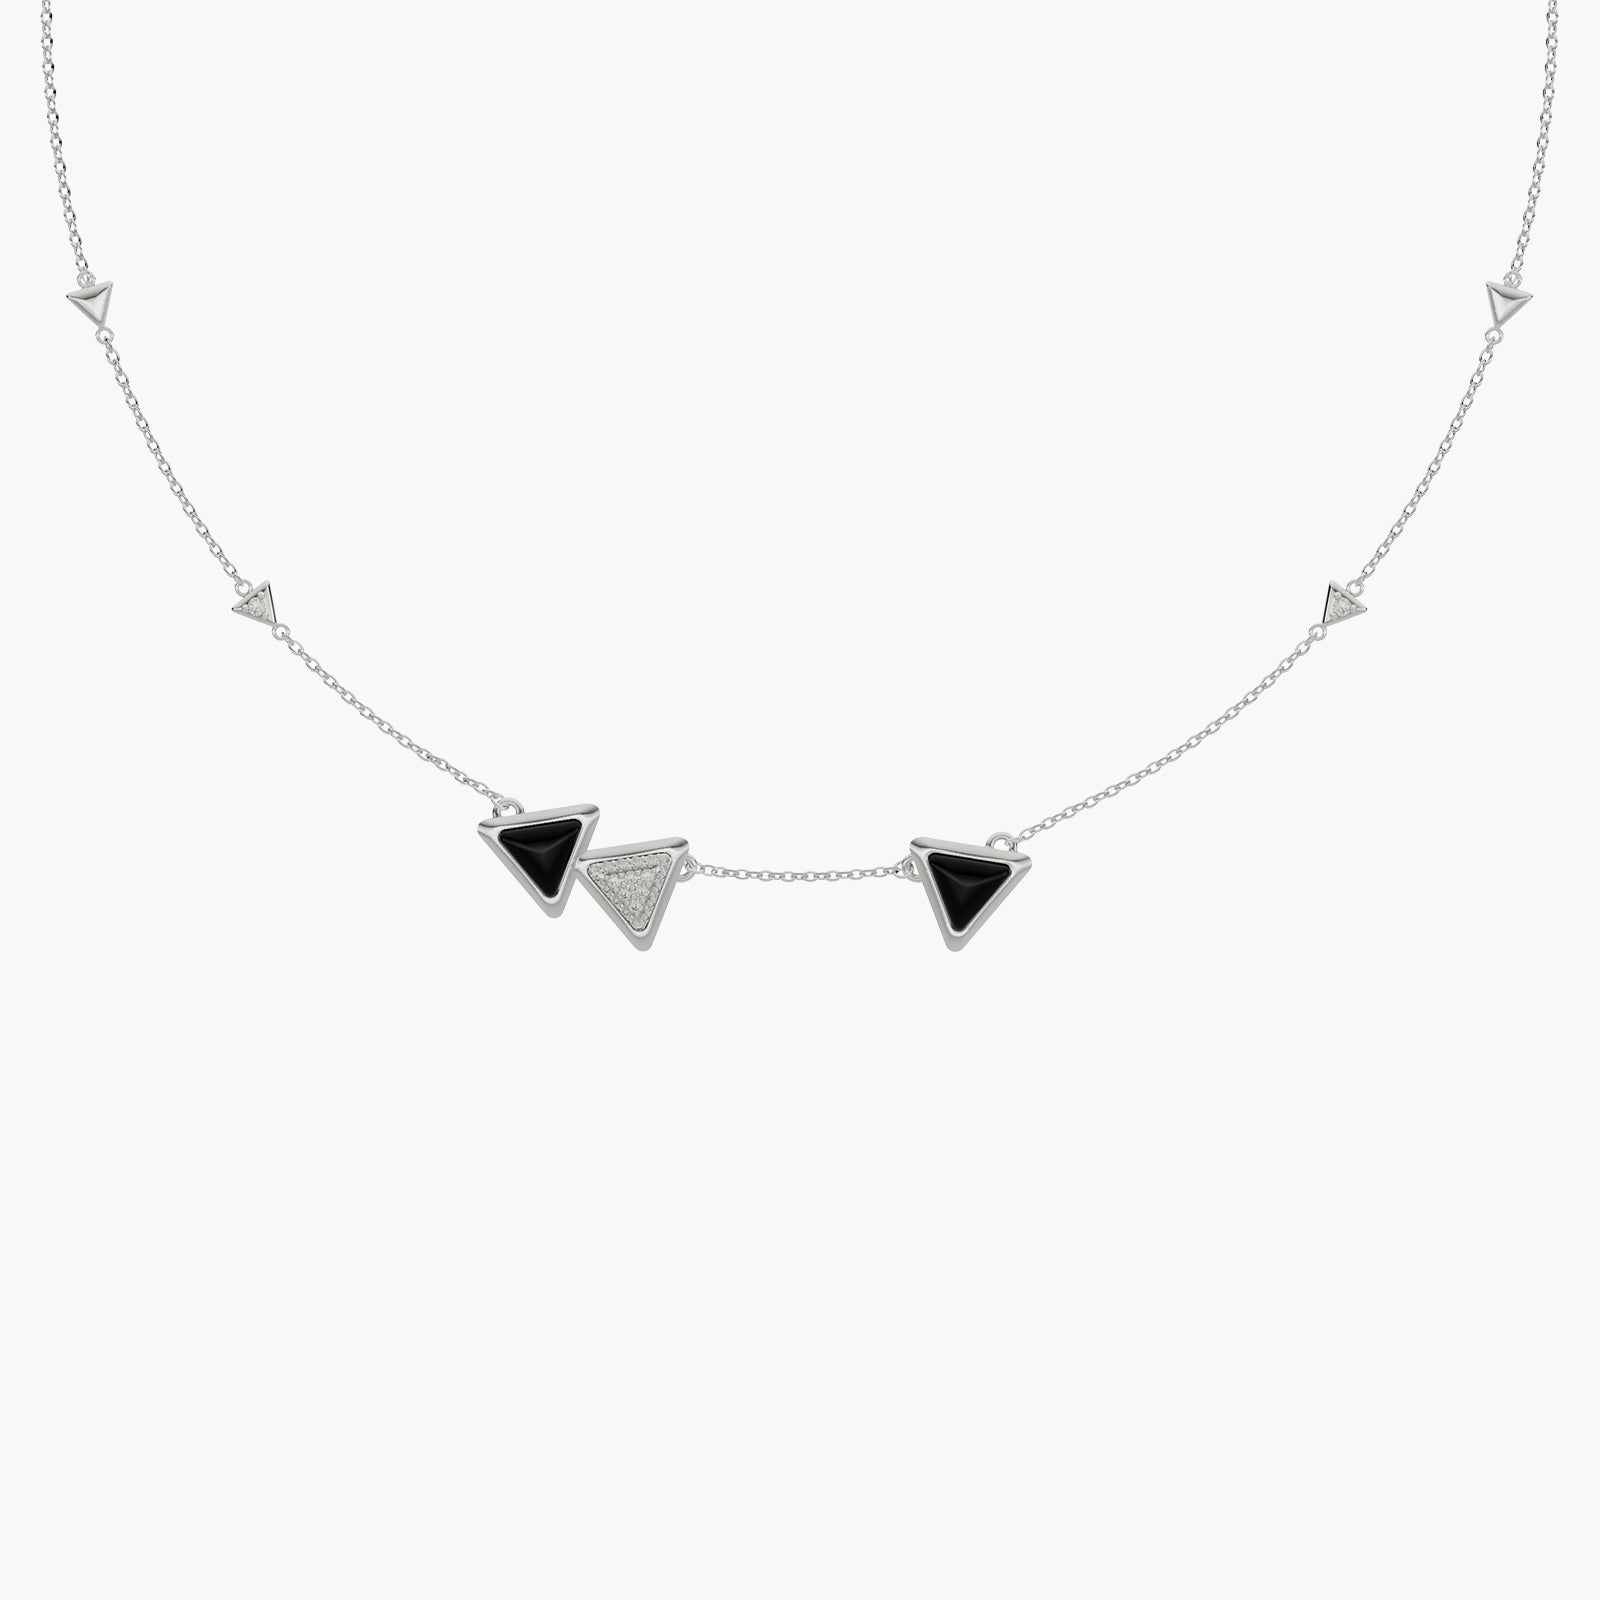 Necklace Dove Vai Forward Exquisite White Gold Onix and Diamonds